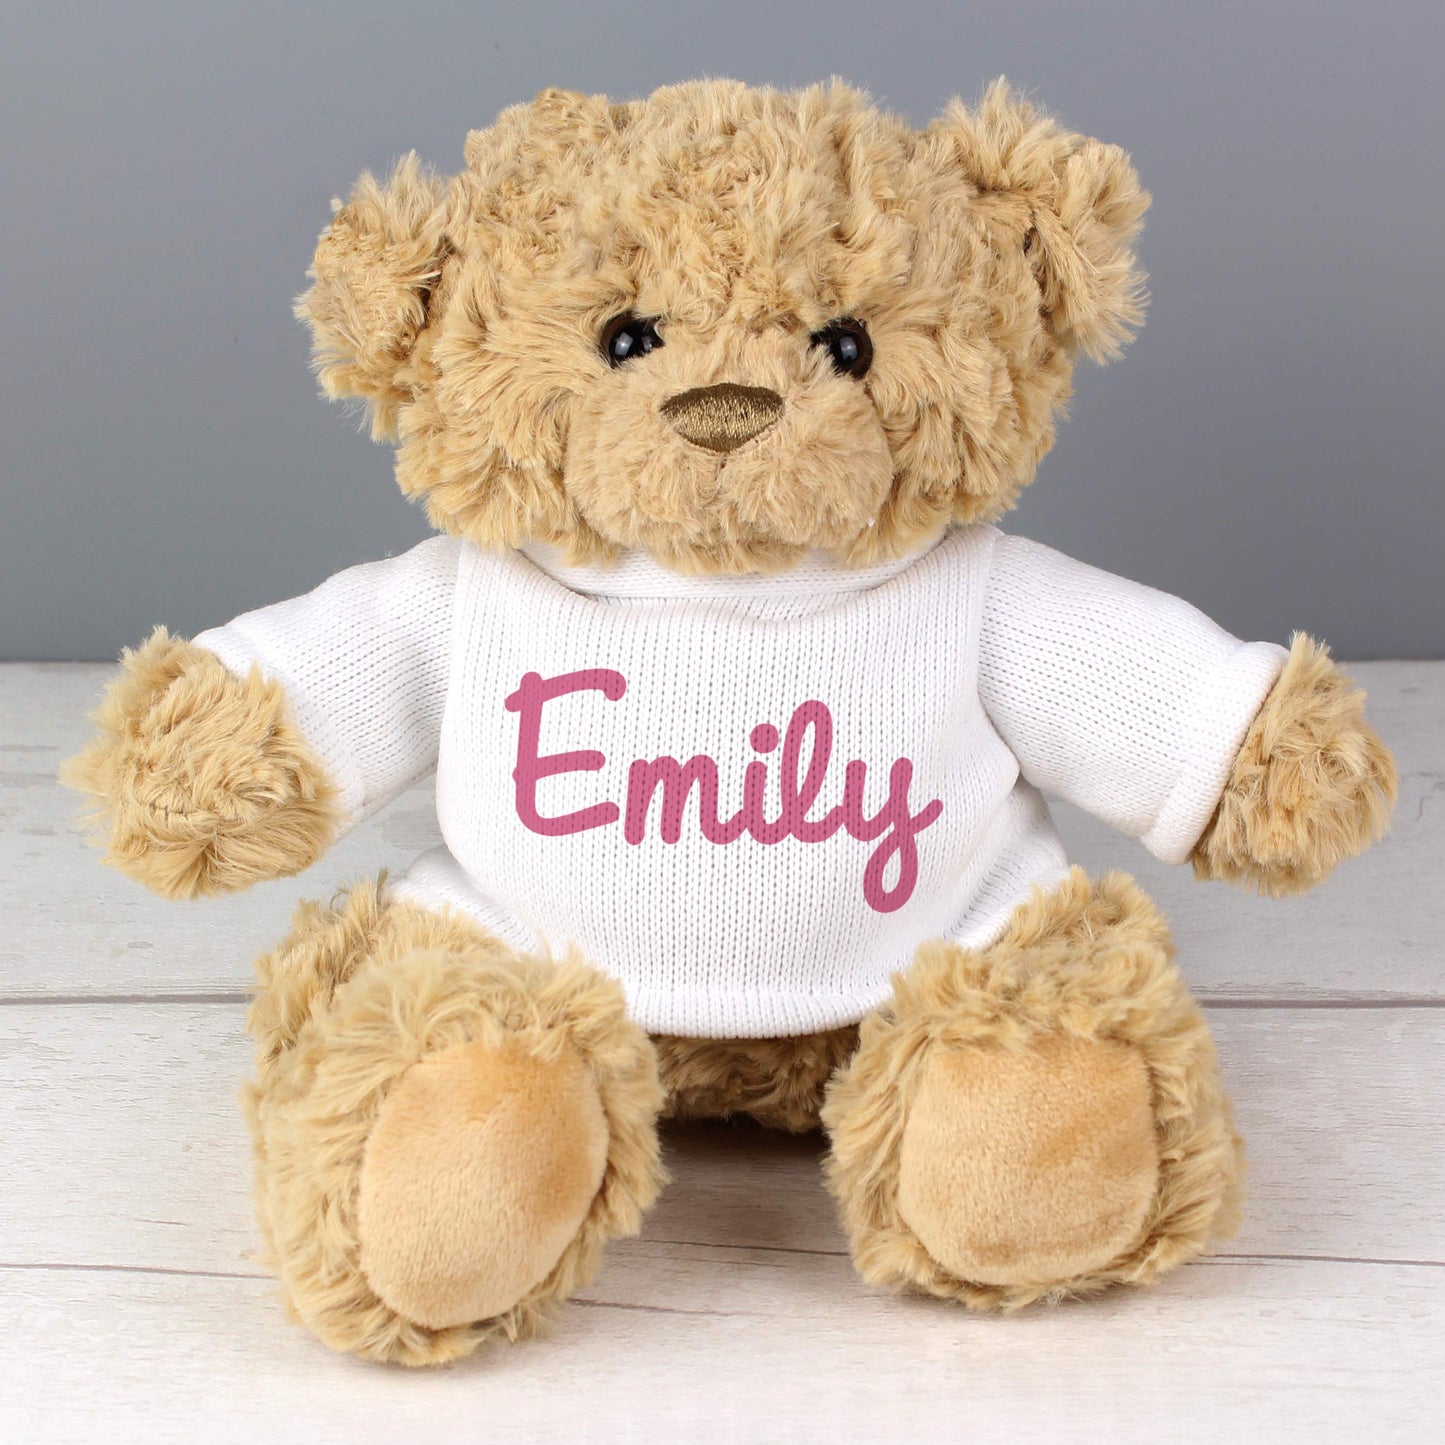 UPDATED DESIGN - Personalised Soft Toy - Name Only Teddy Bear